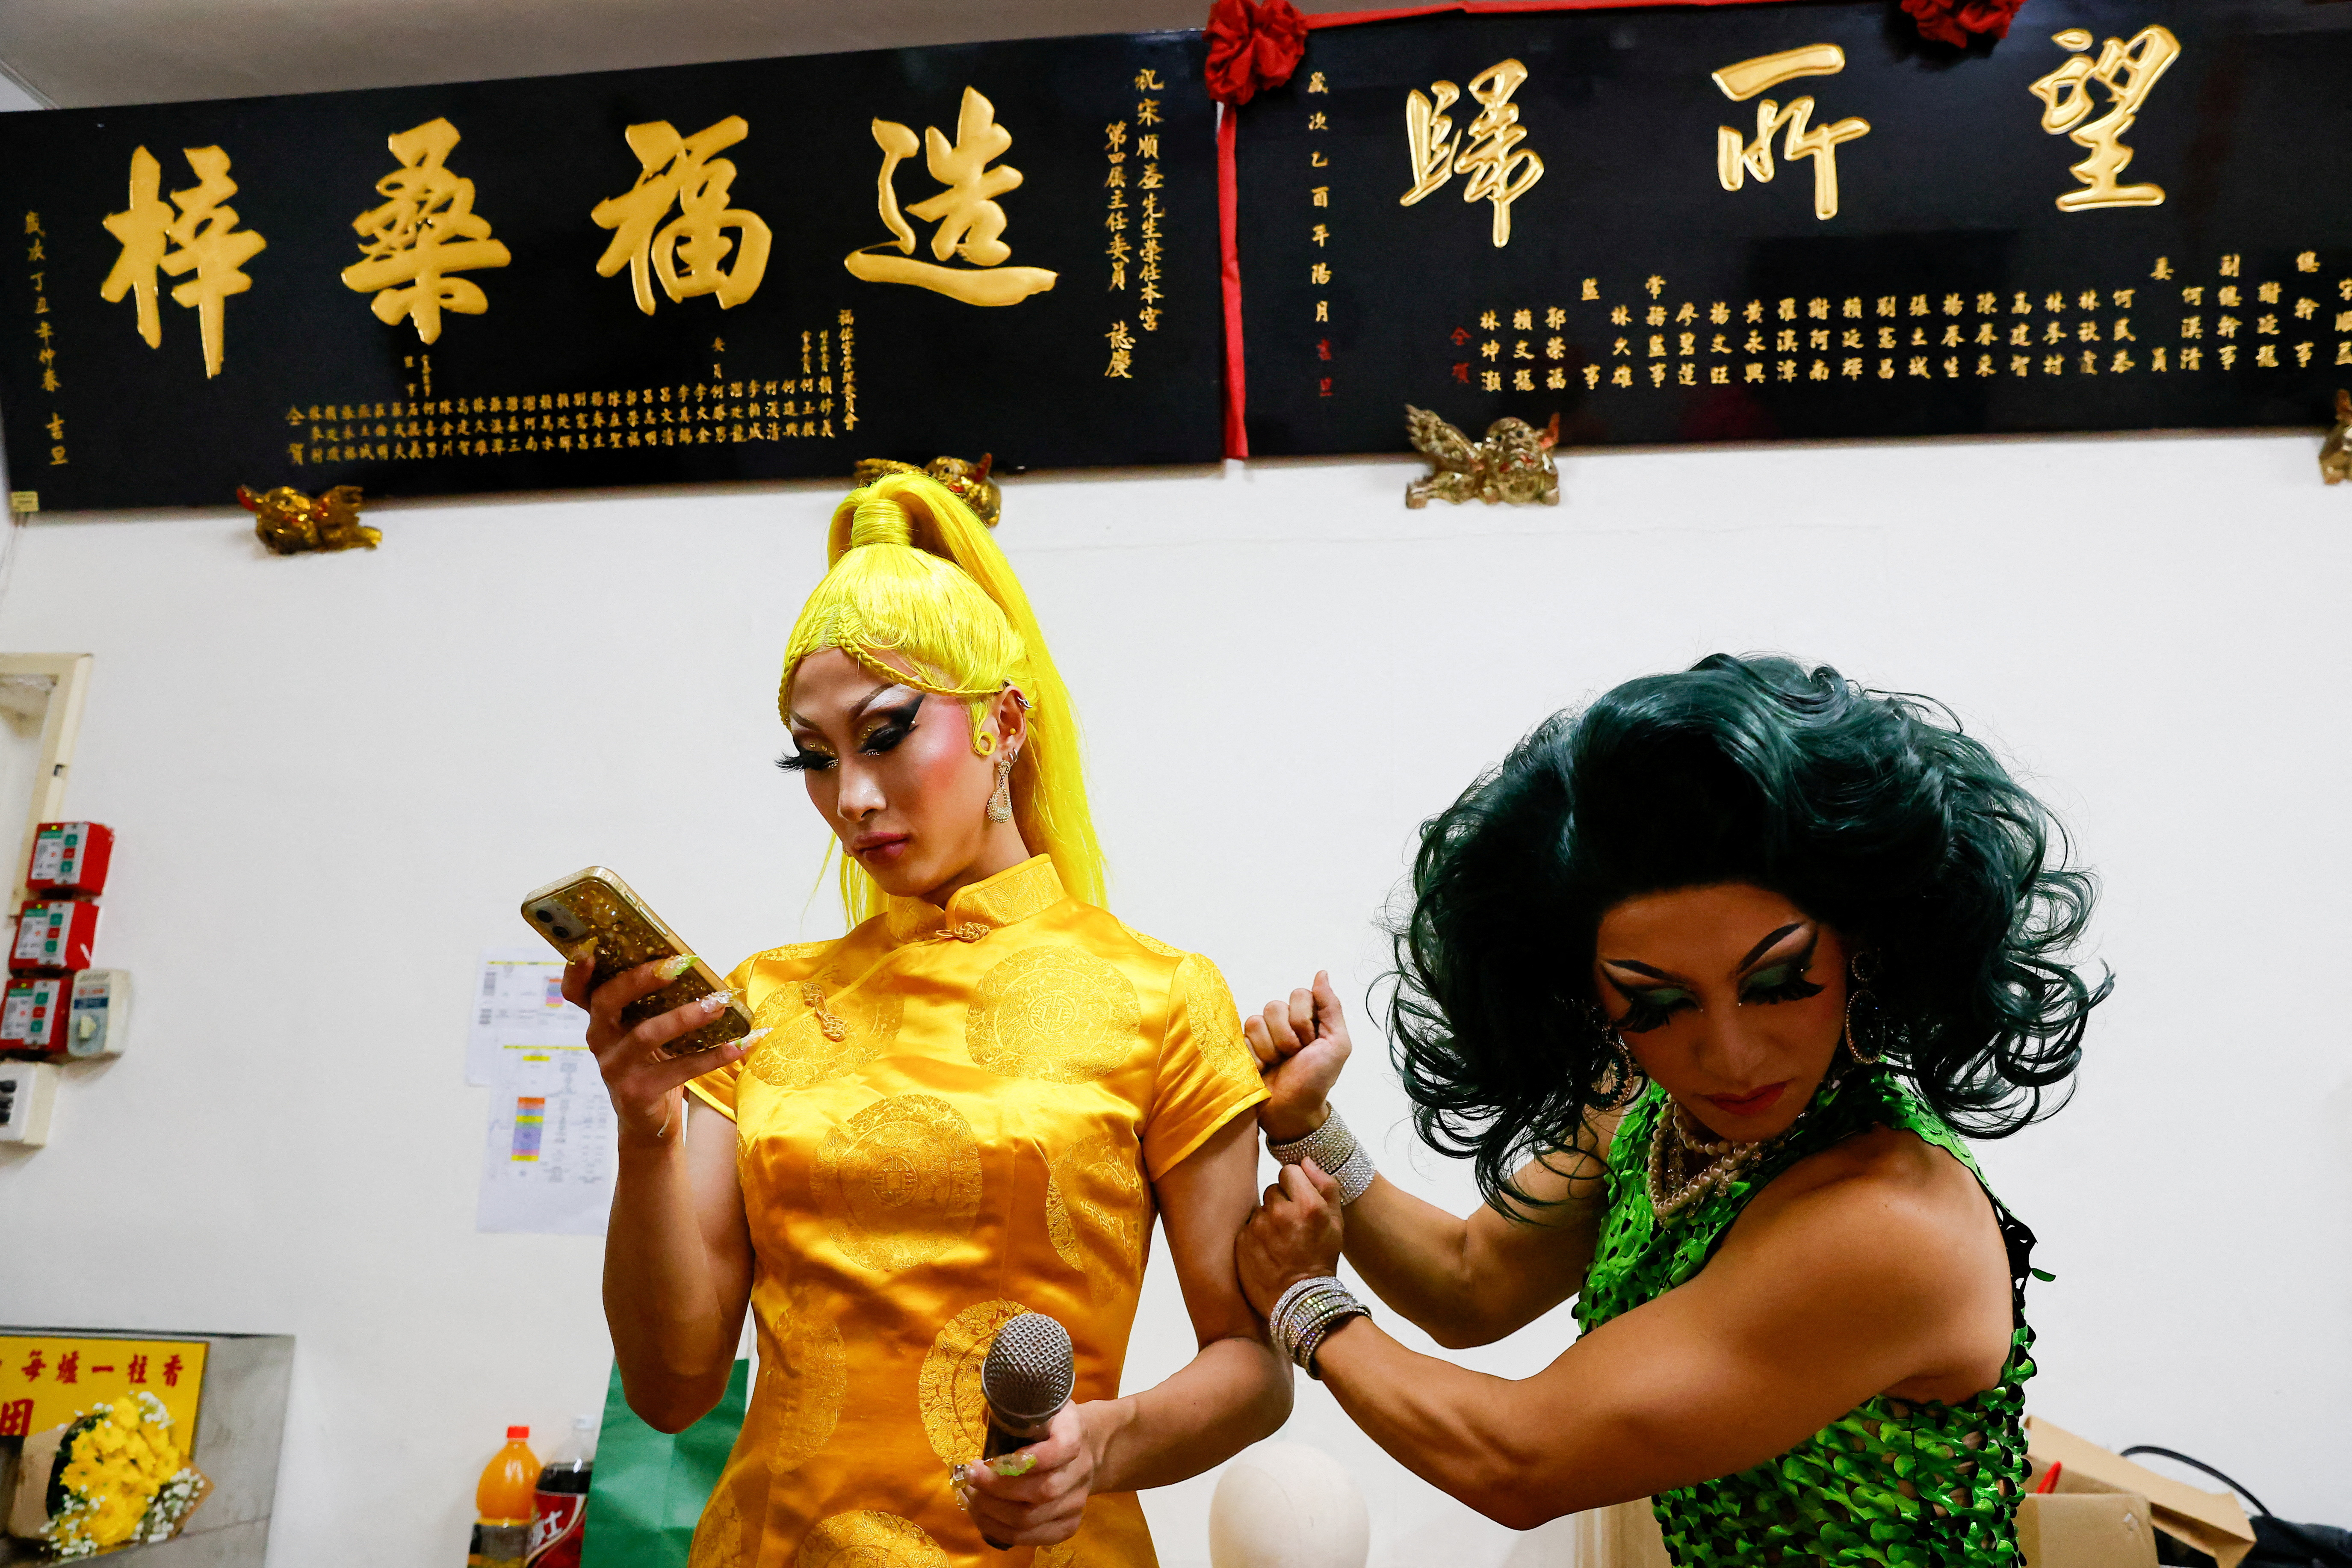 Nymphia Wind and another Taiwanese drag queen prepare before their performance at a local temple in Taipei